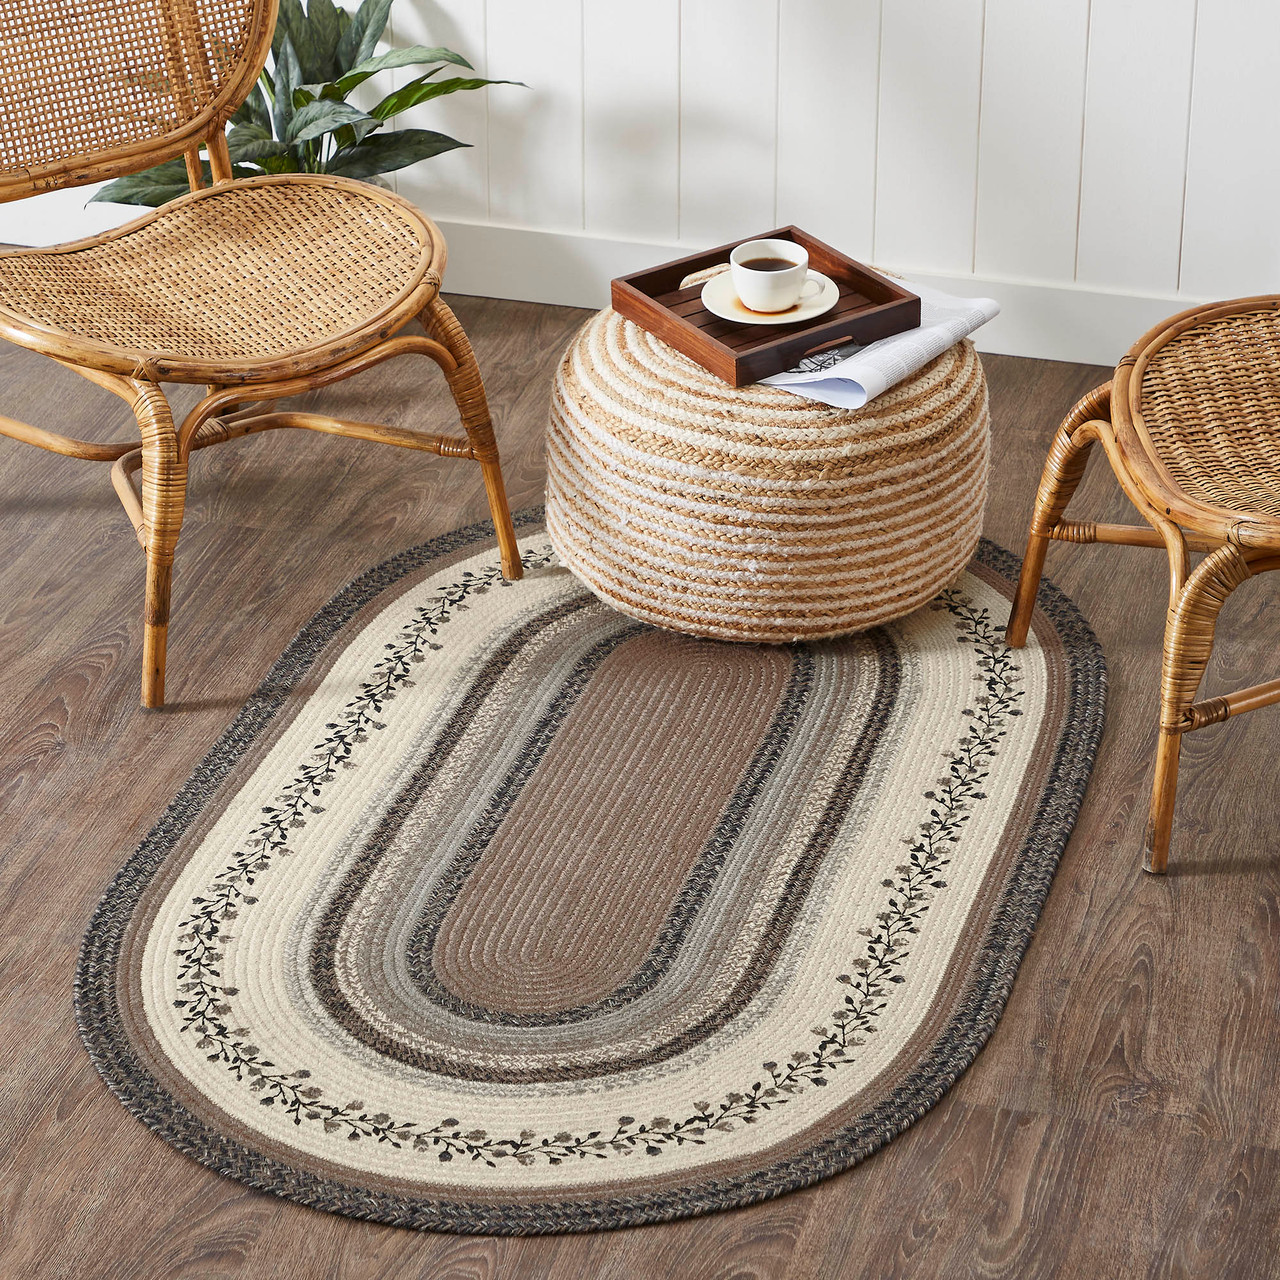 Colonial Star Jute Rug Oval w/ Pad 36x60 by Mayflower Market - VHC Brands